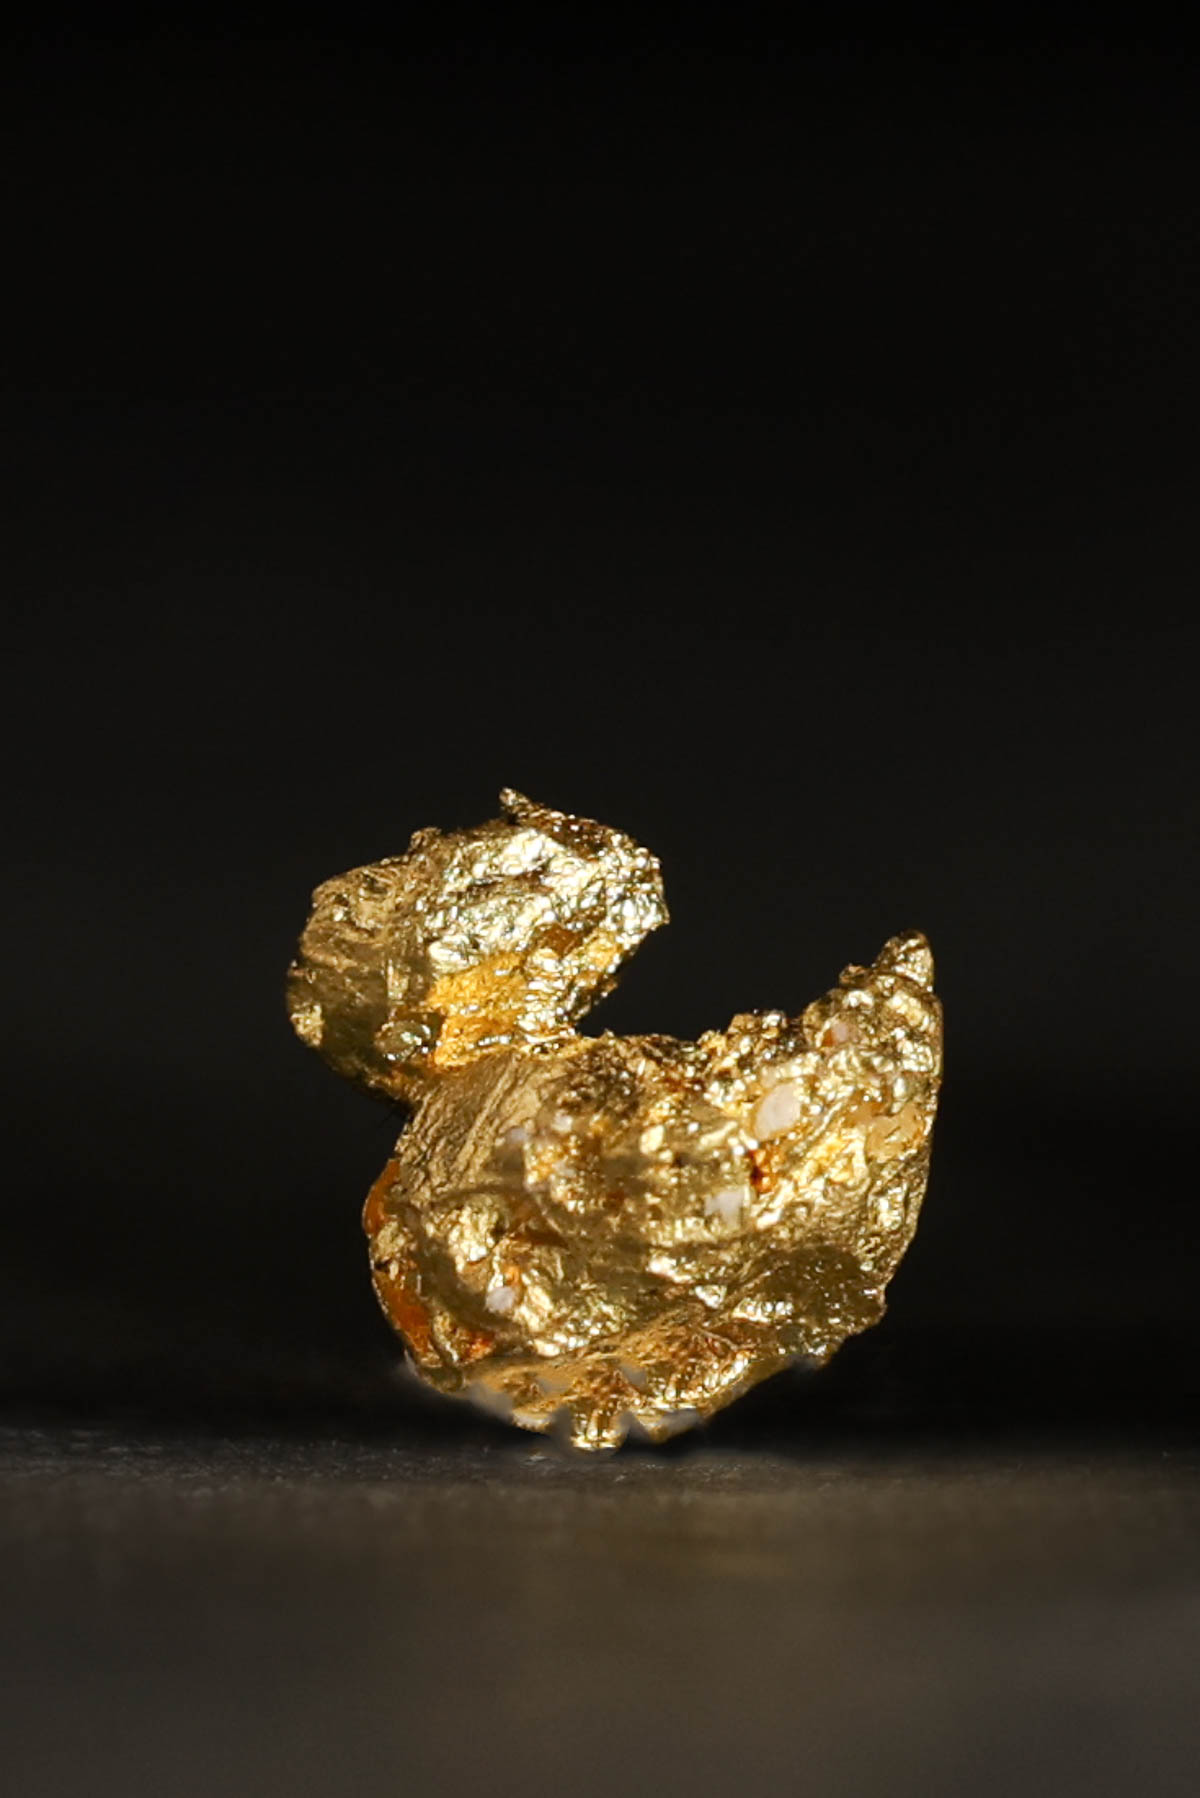 "Rubber Ducky" - Unique Gold Nugget from the Mockingbird Mine